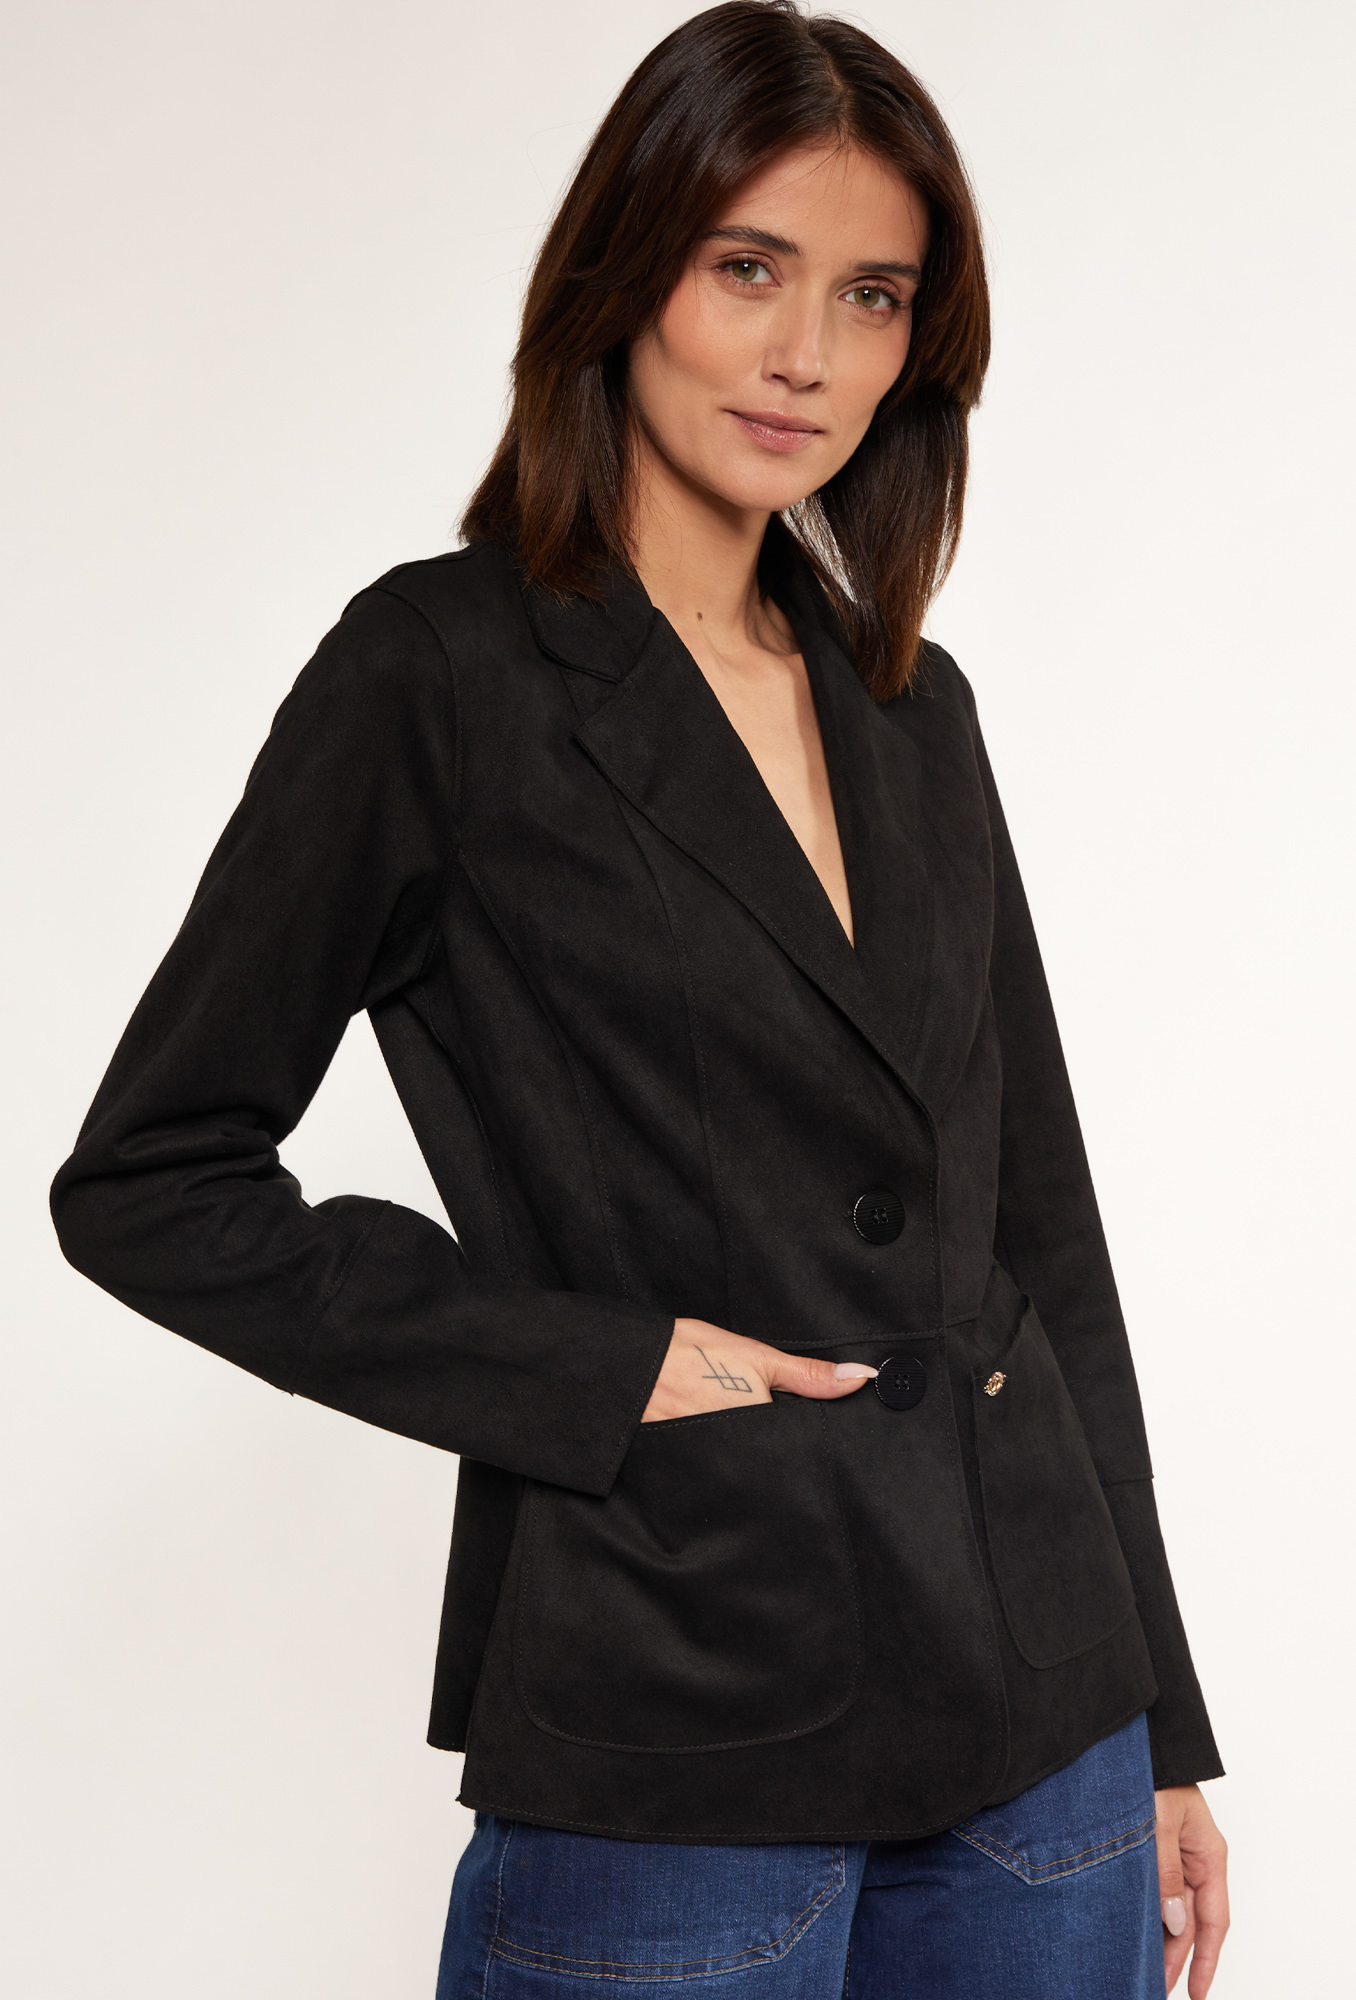 MONNARI Woman's Jackets Suede Jacket With A Classic Cut